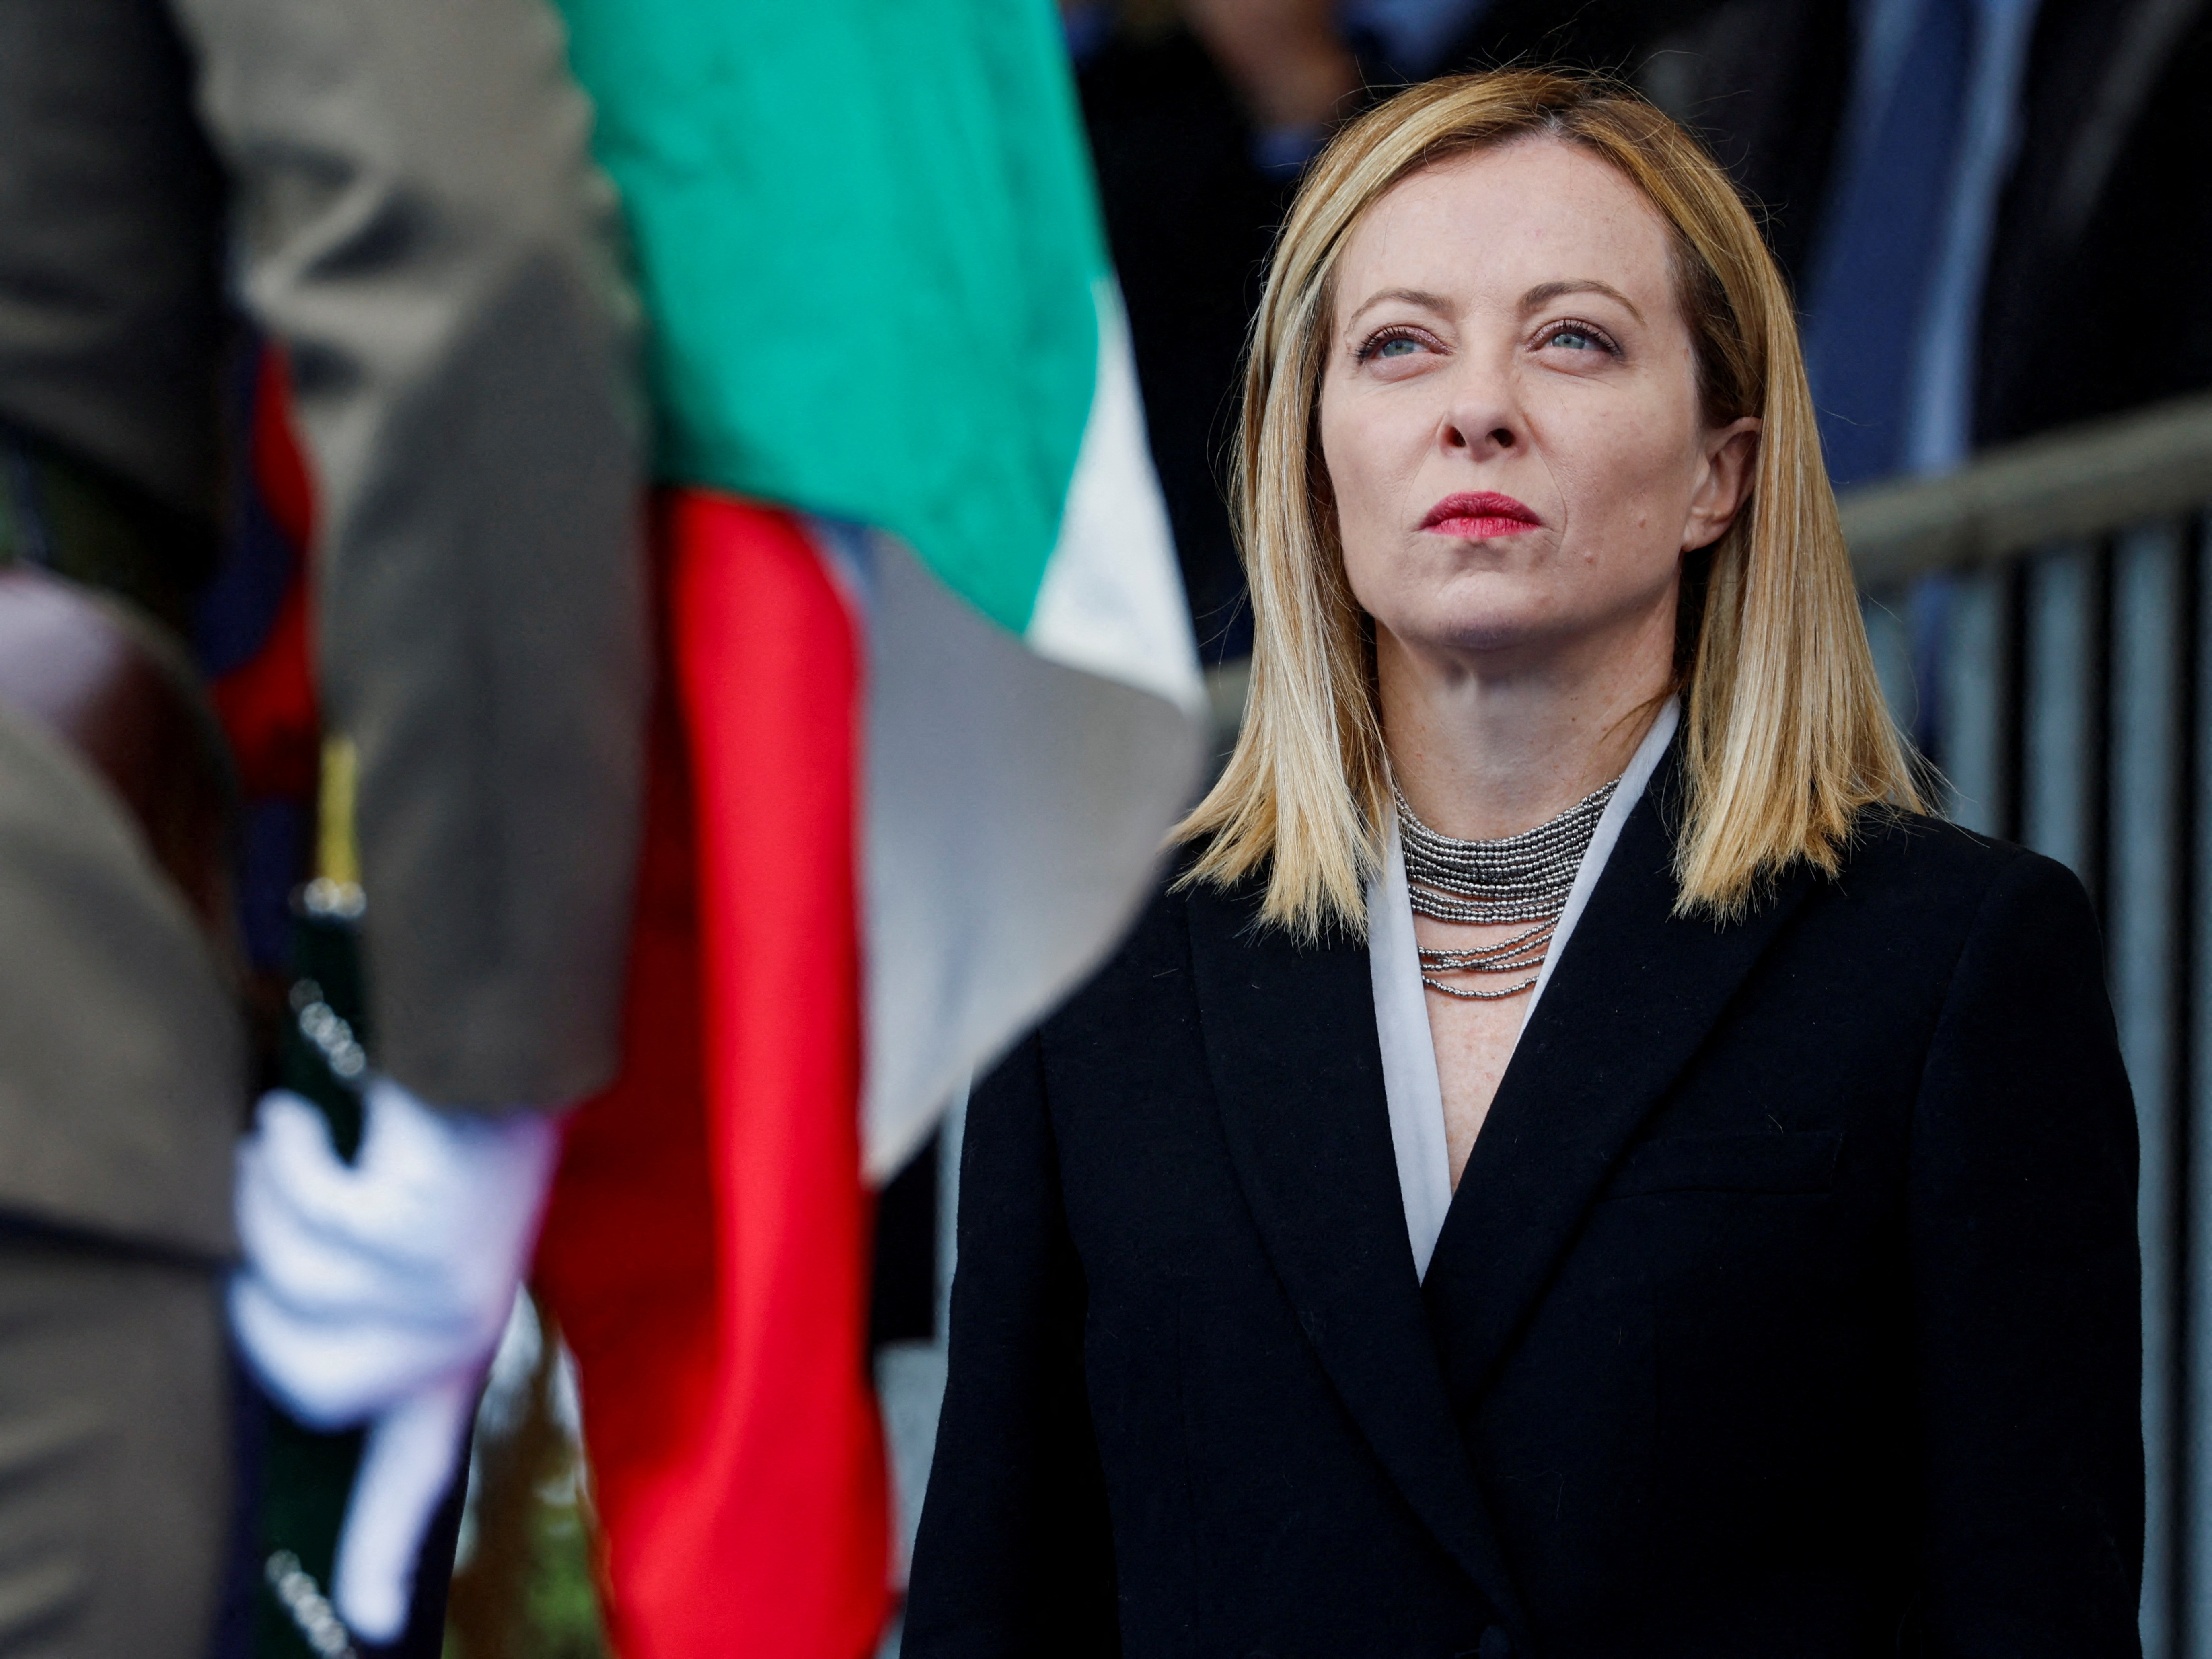 Italy's PM Giorgia Meloni attends a ceremony to mark the 163rd anniversary of the Italian Army